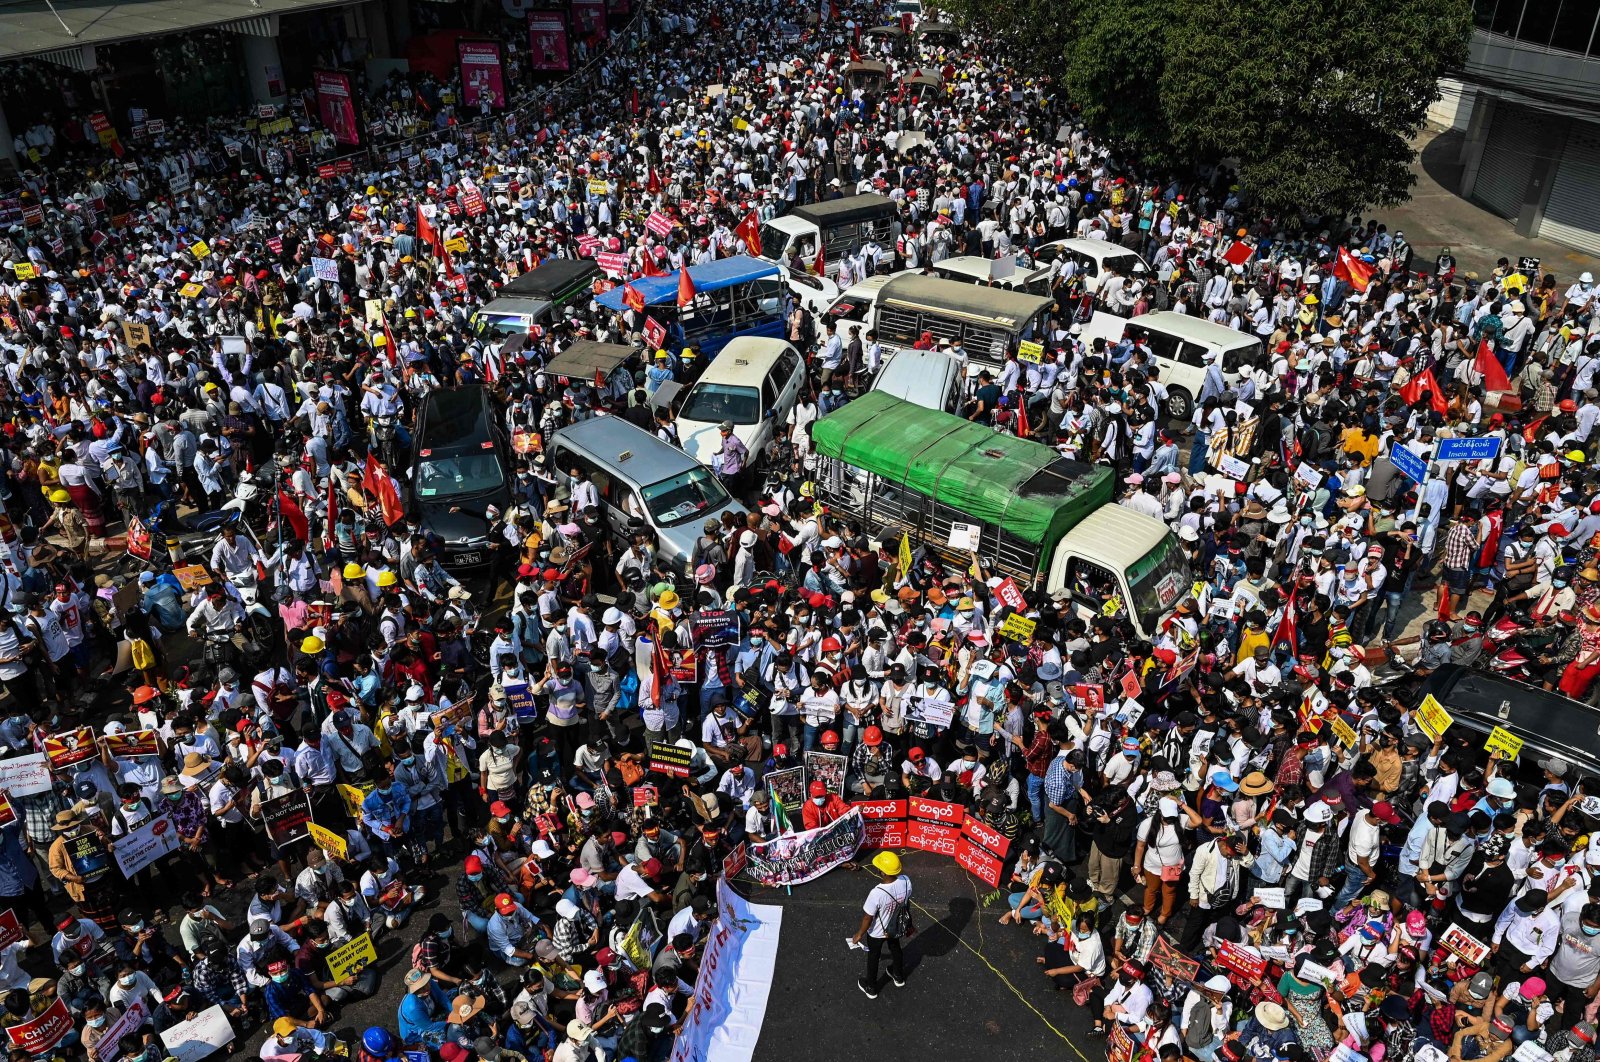 Protesters mass around vehicles as they block roads during a demonstration against the military coup in Yangon on Feb. 22, 2021. (AFP Photo)